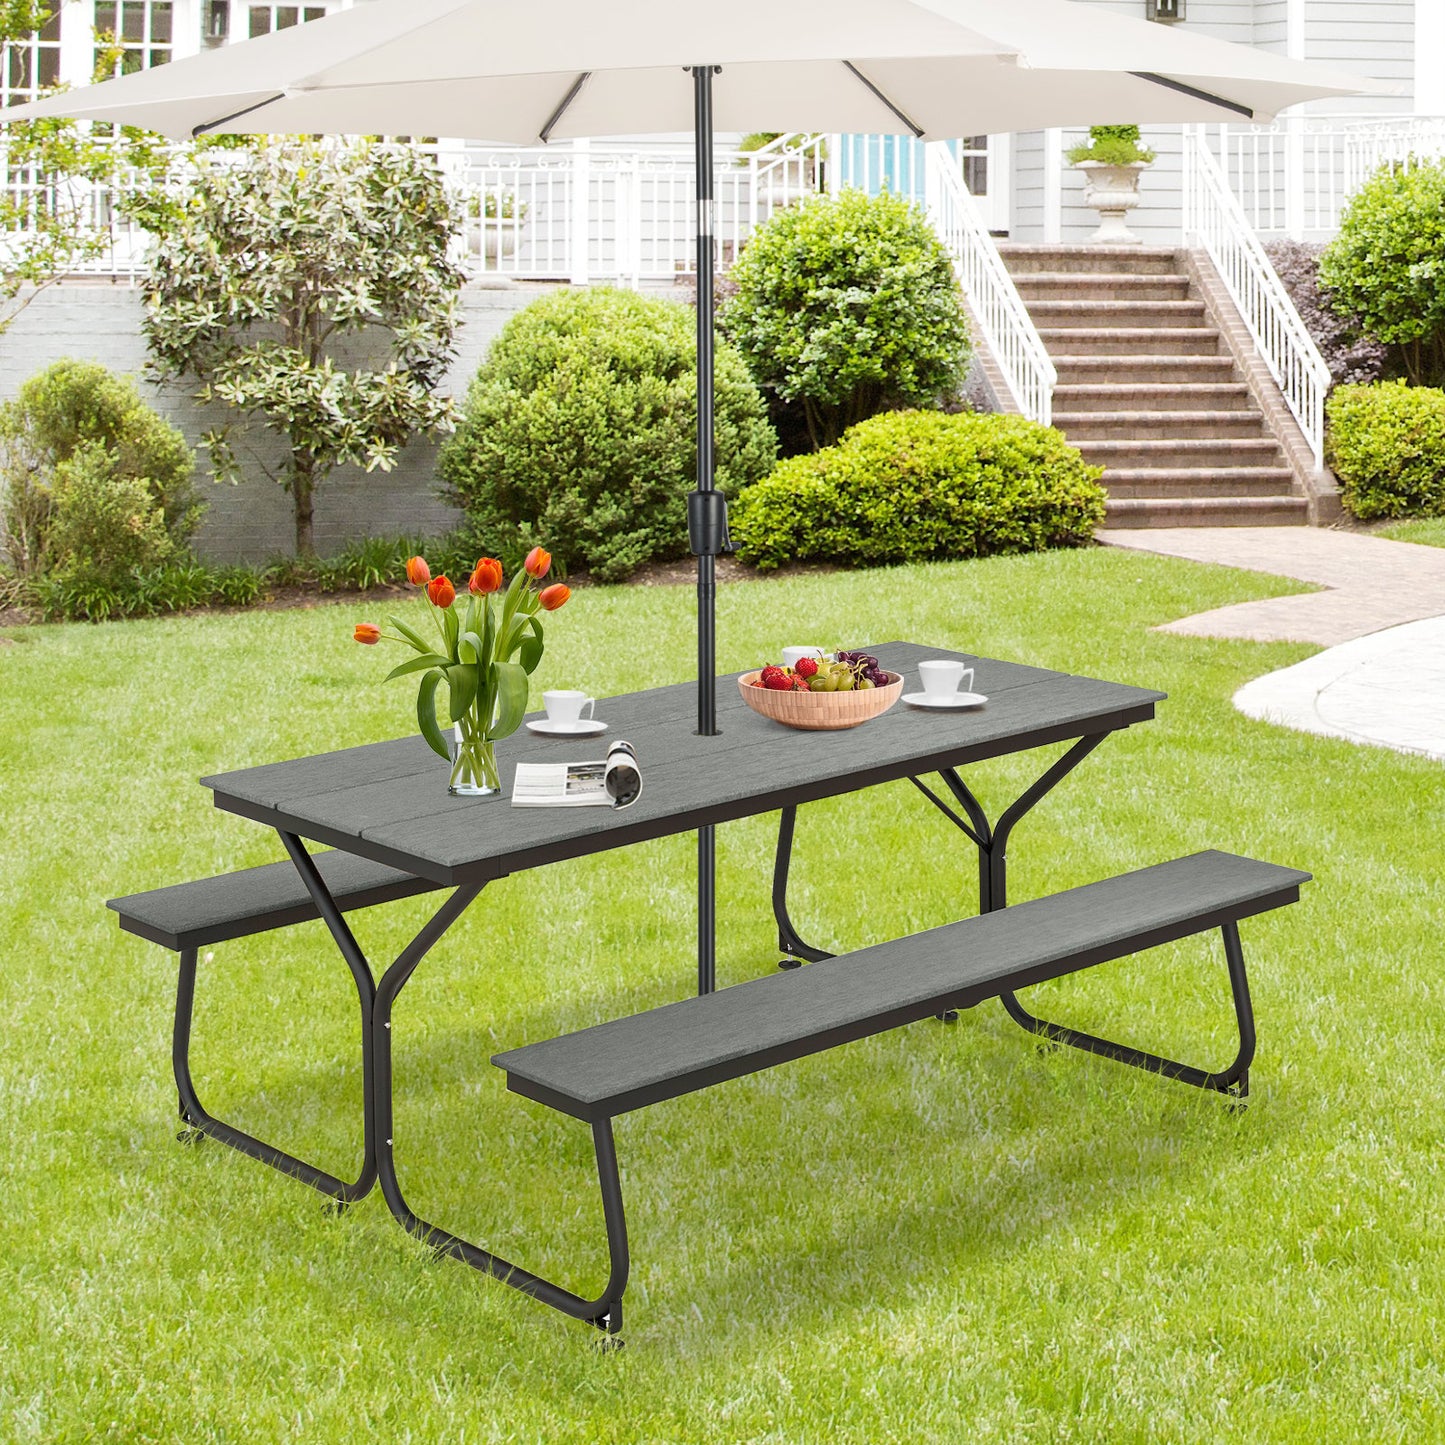 6 Feet Outdoor Picnic Table Bench Set for 6-8 People, Gray - Gallery Canada